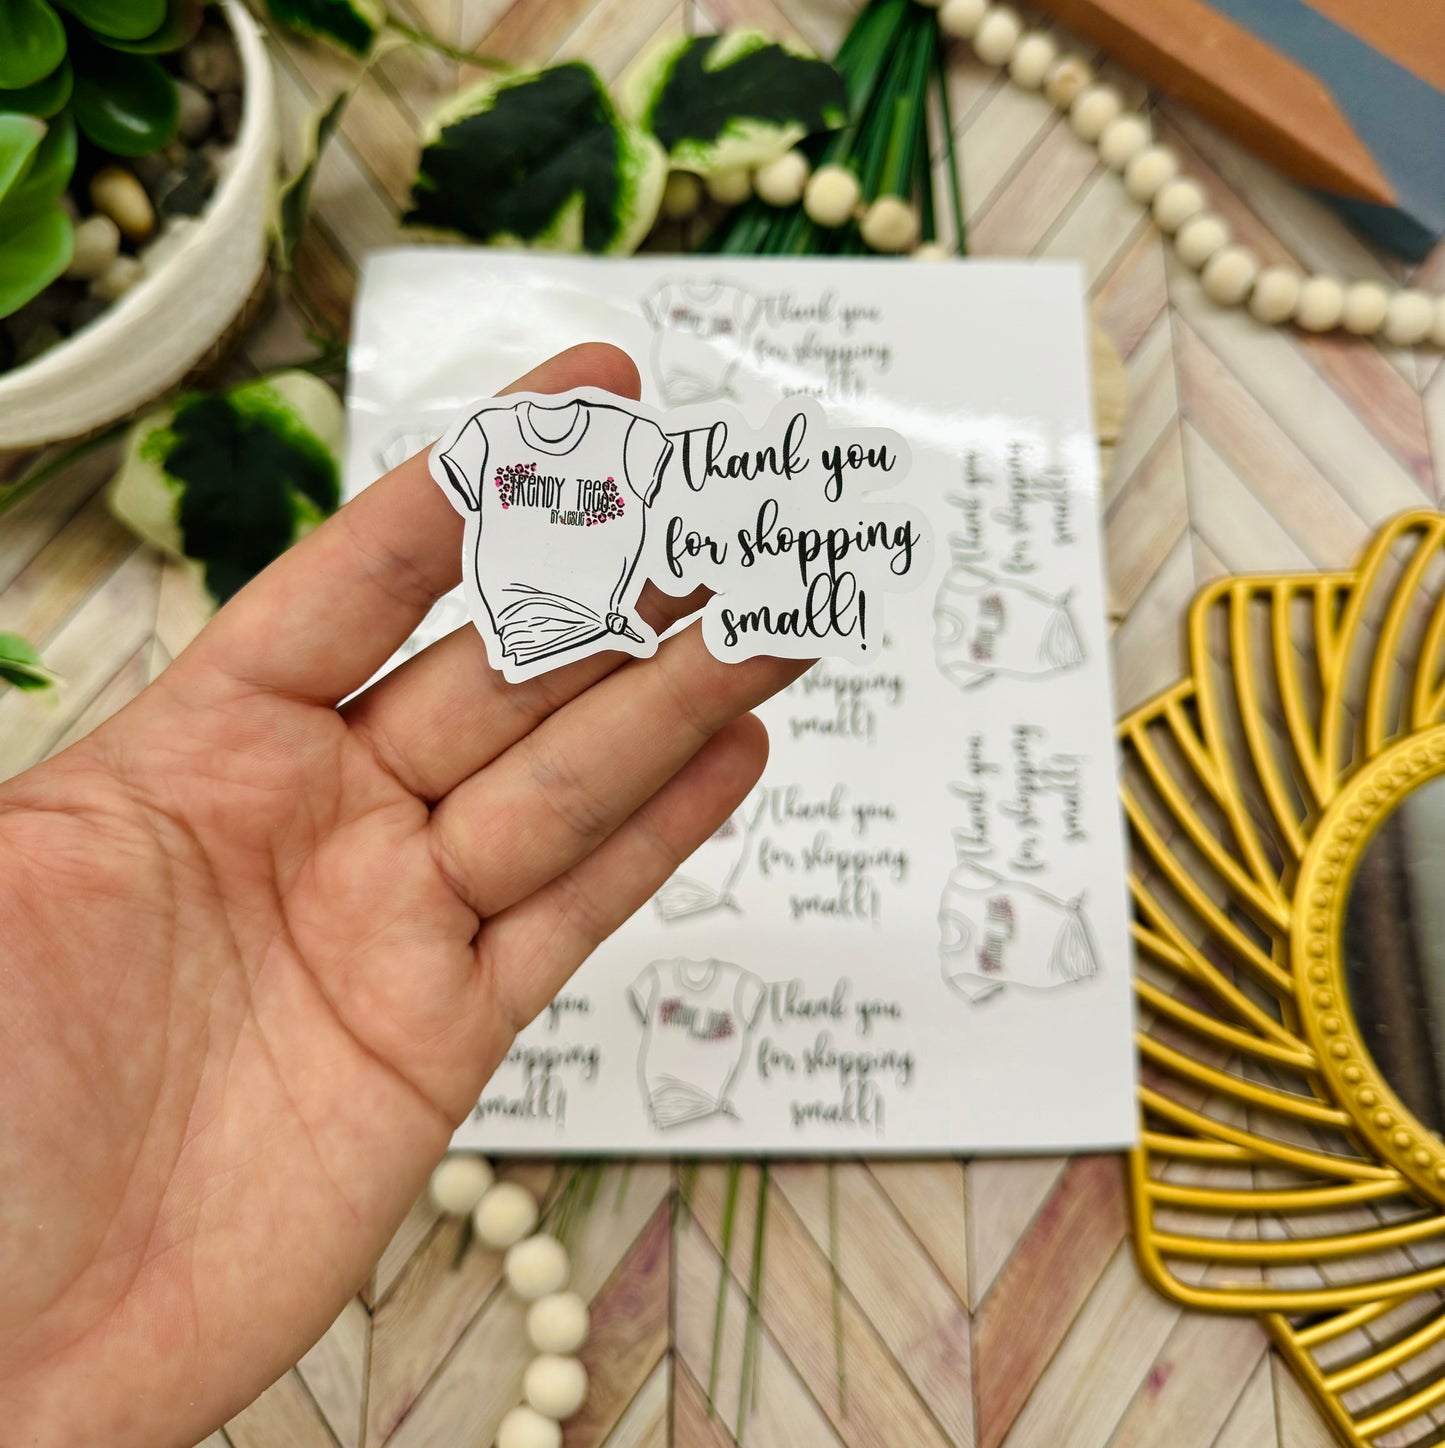 Thank you for shopping small- Sticker sheet